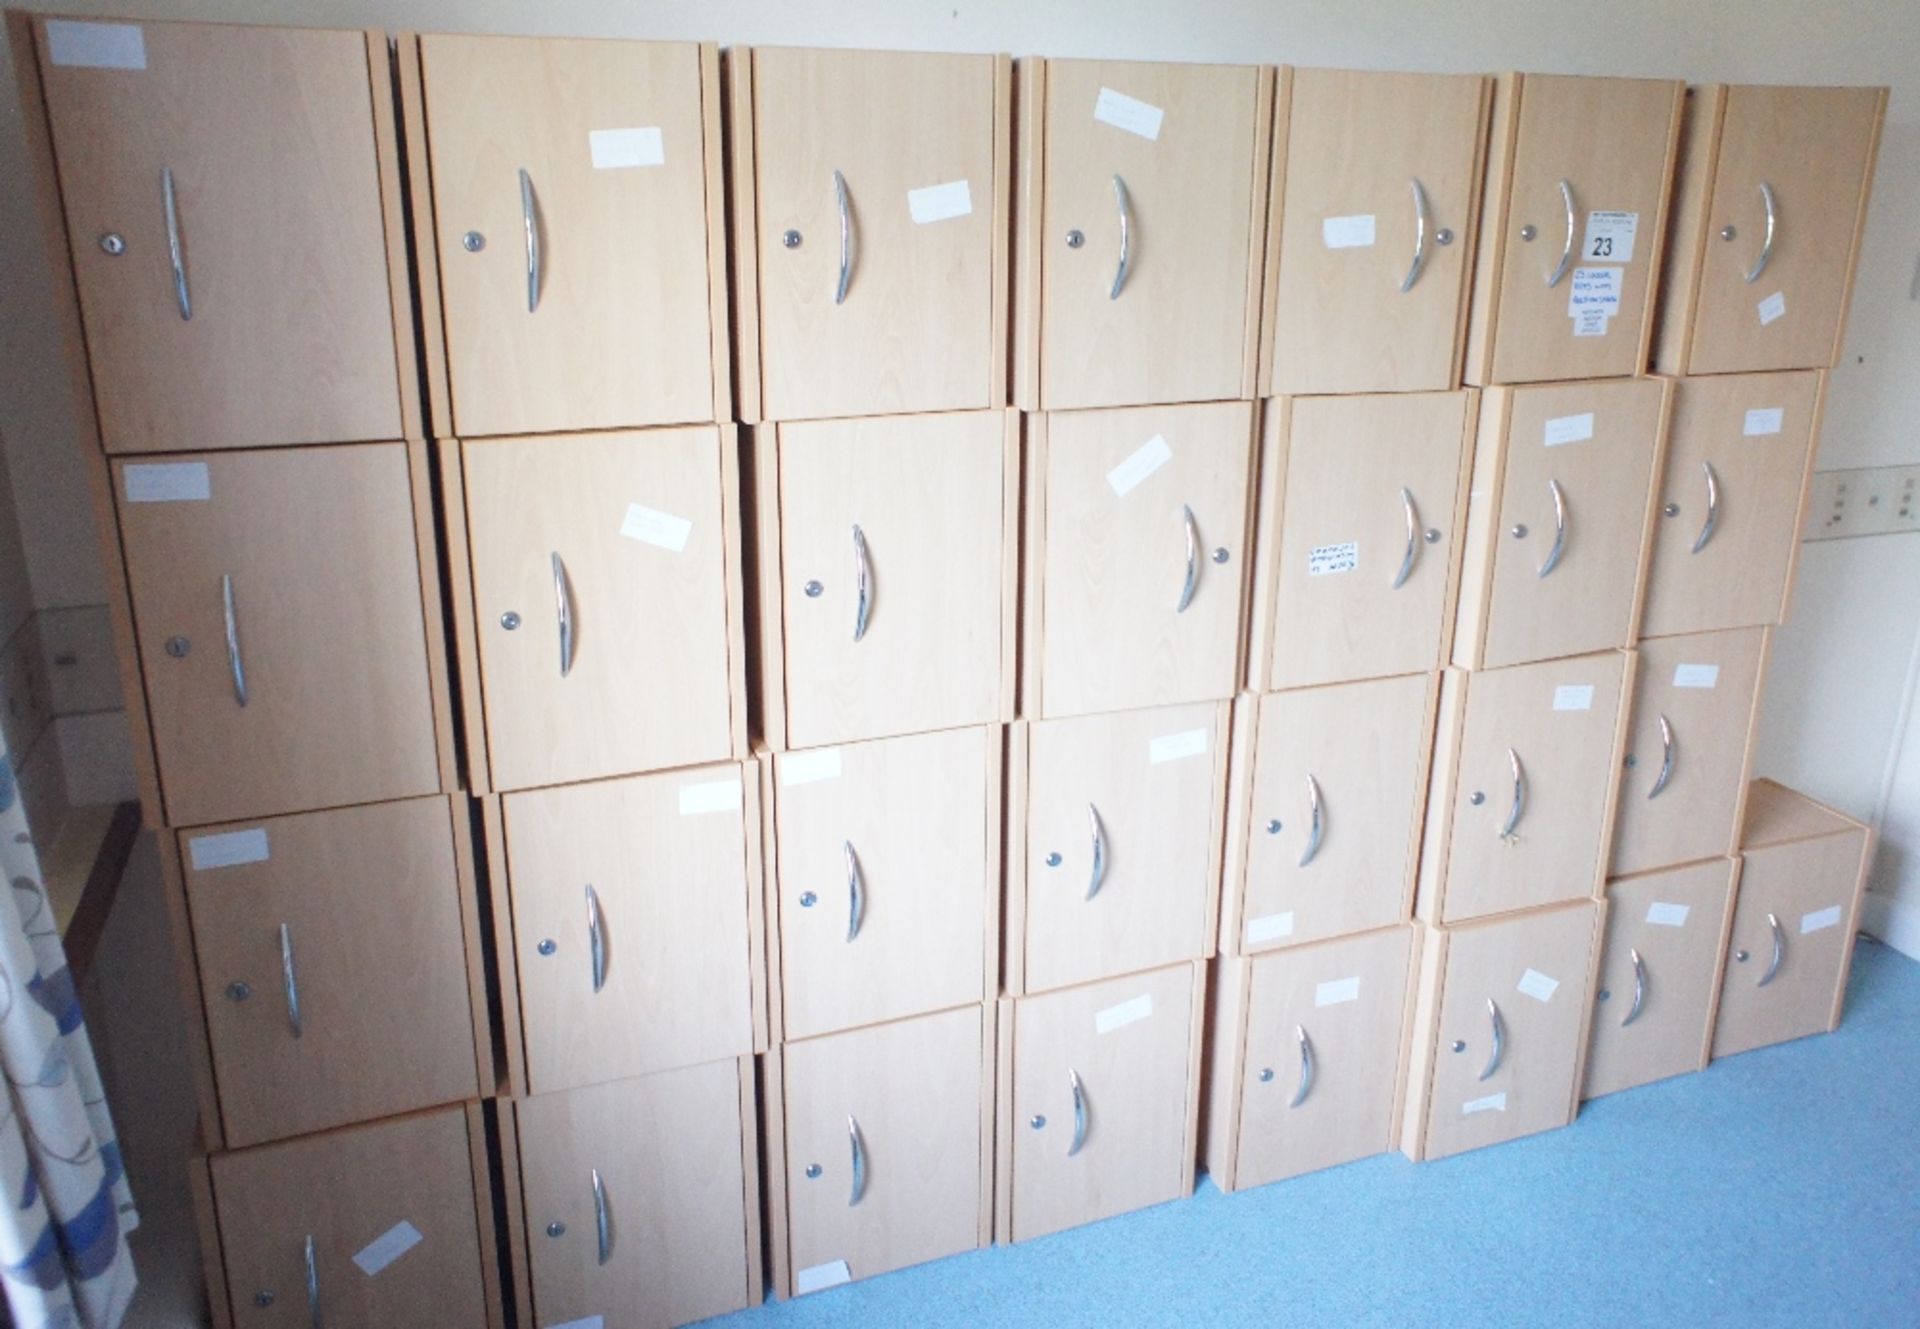 29 lightwood single wall mounted personal lockers (25 keys with staff) (located in room 13)